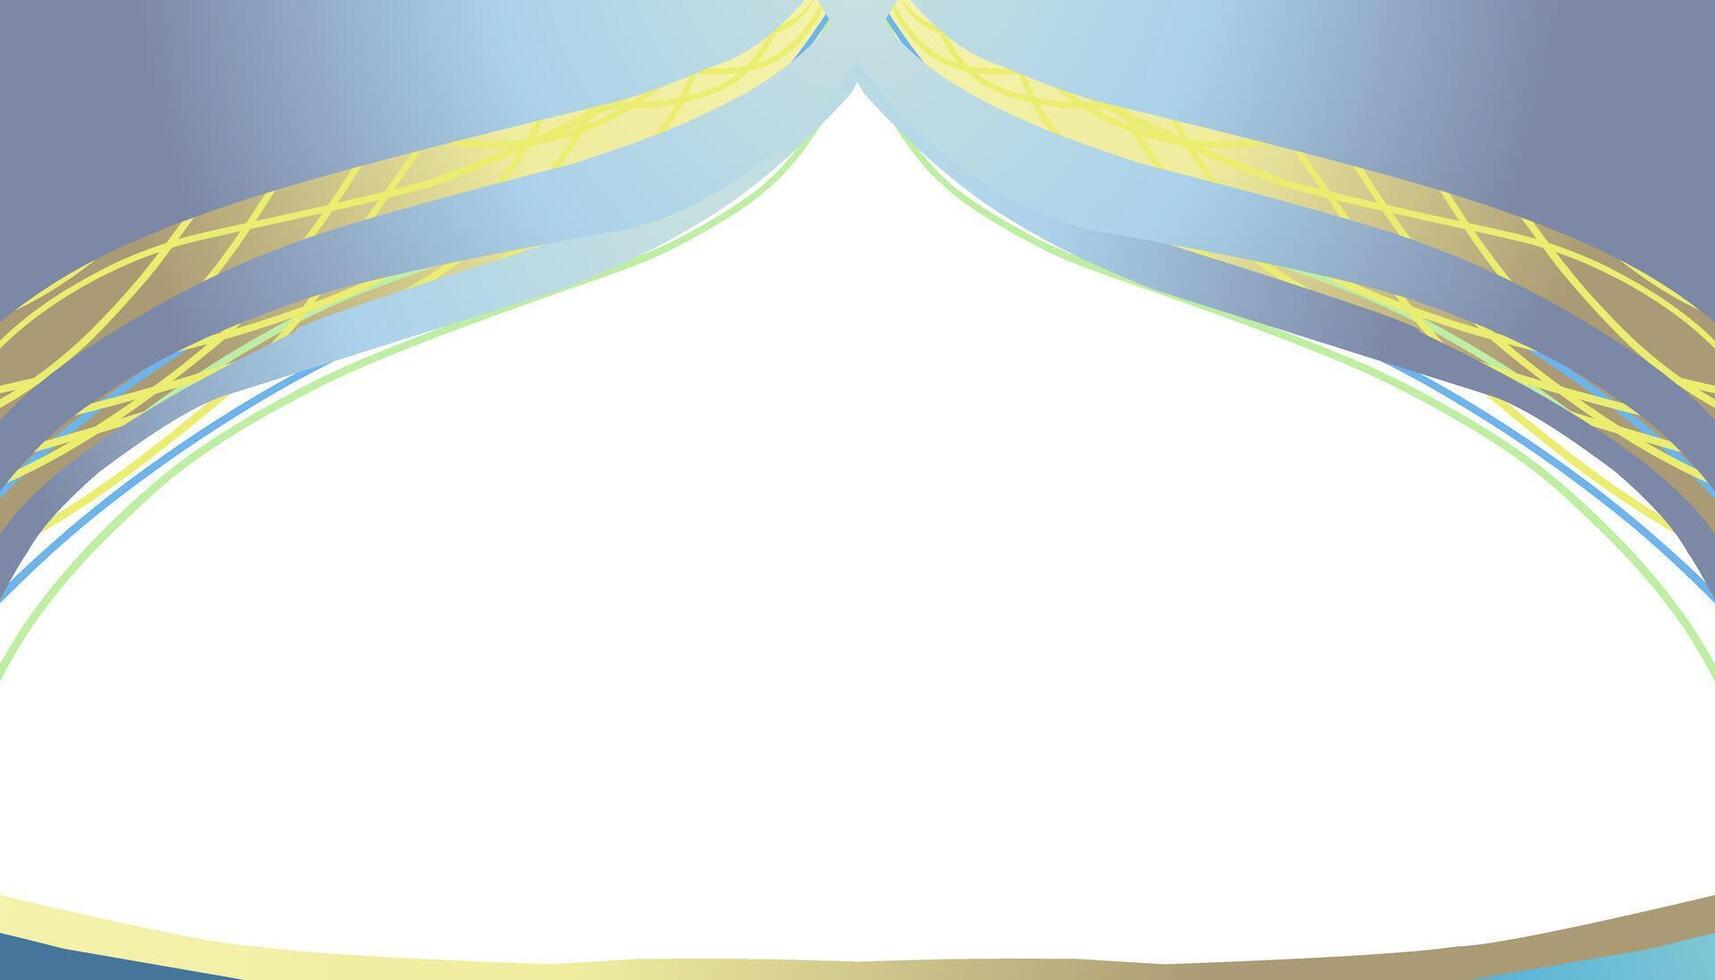 Ramadan and Muslim holidays themed background with a mosque dome in gradient blue and gold lines vector